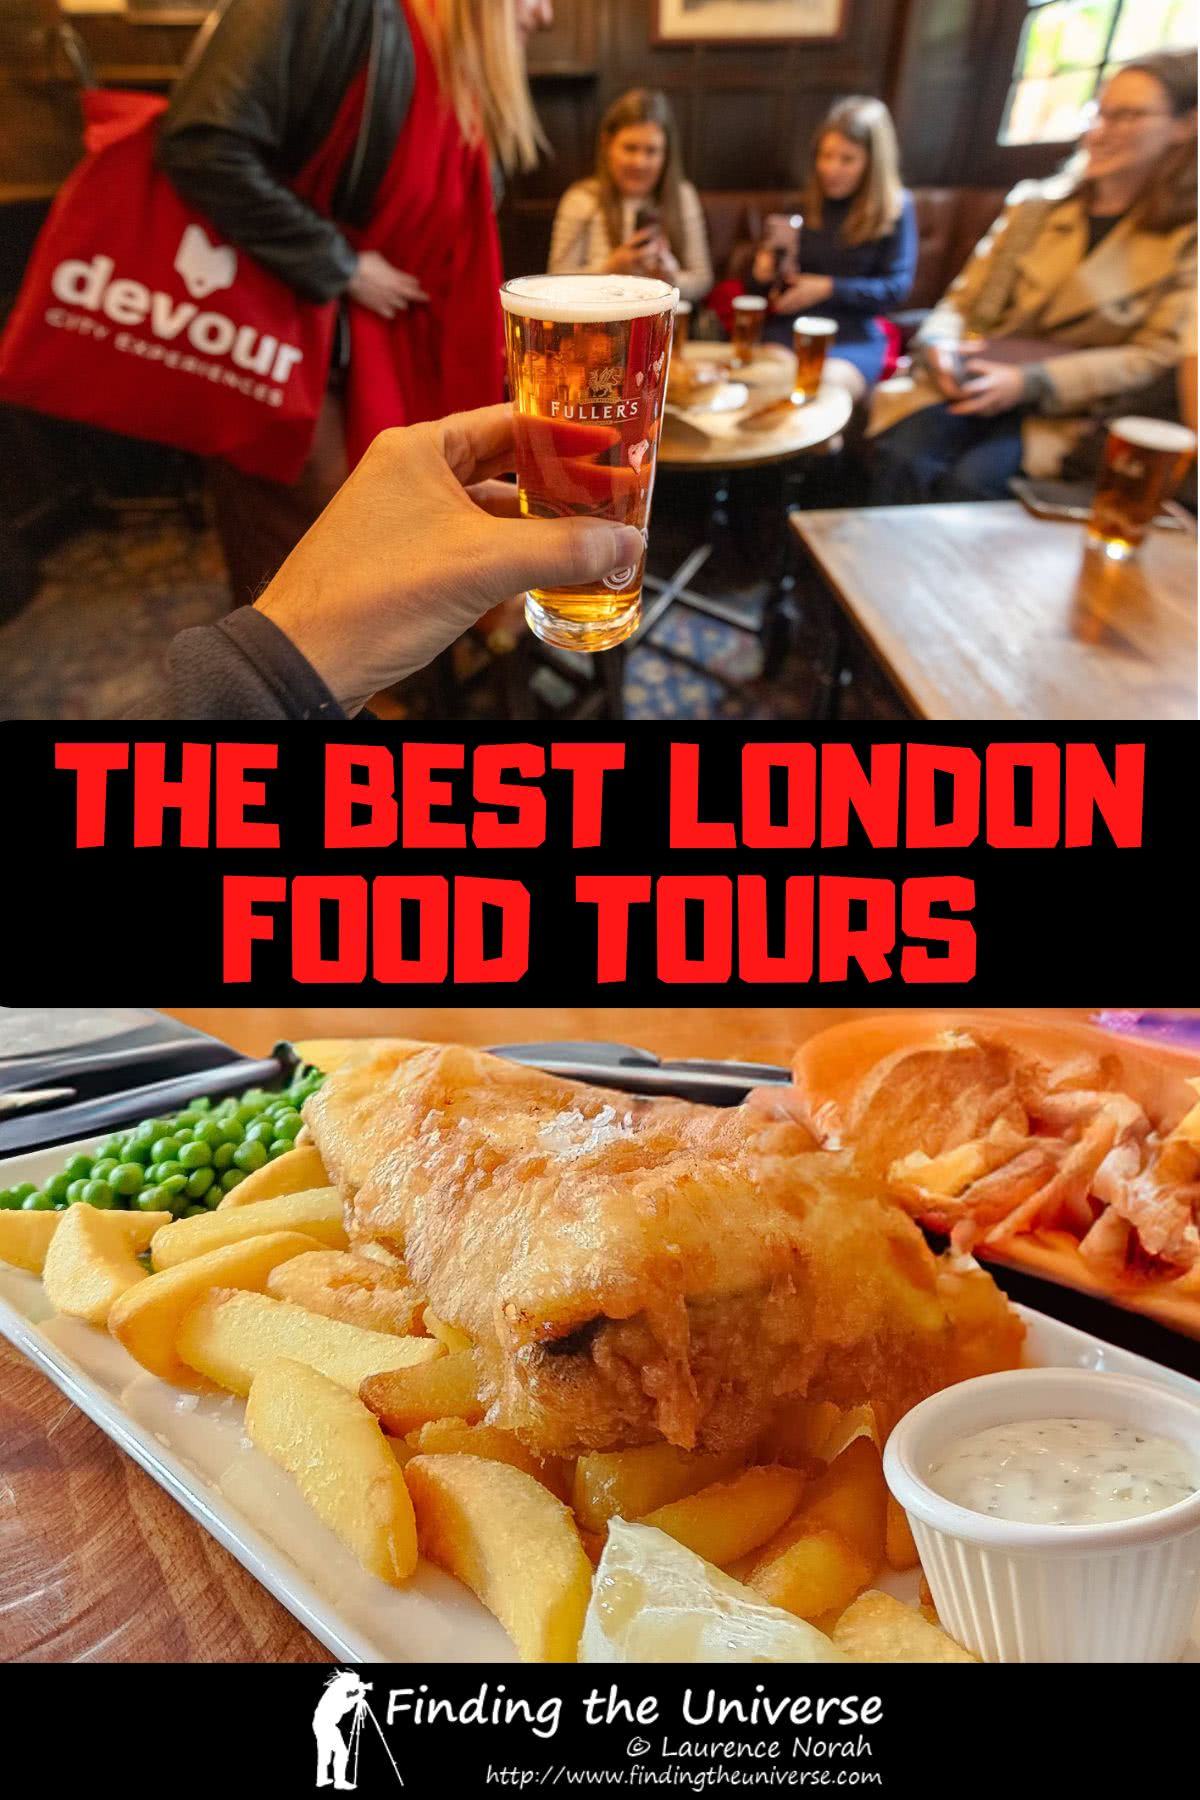 A detailed guide to food tours in London. Suggested food and drink to try, the best tours to take, advice on choosing a tour and more!